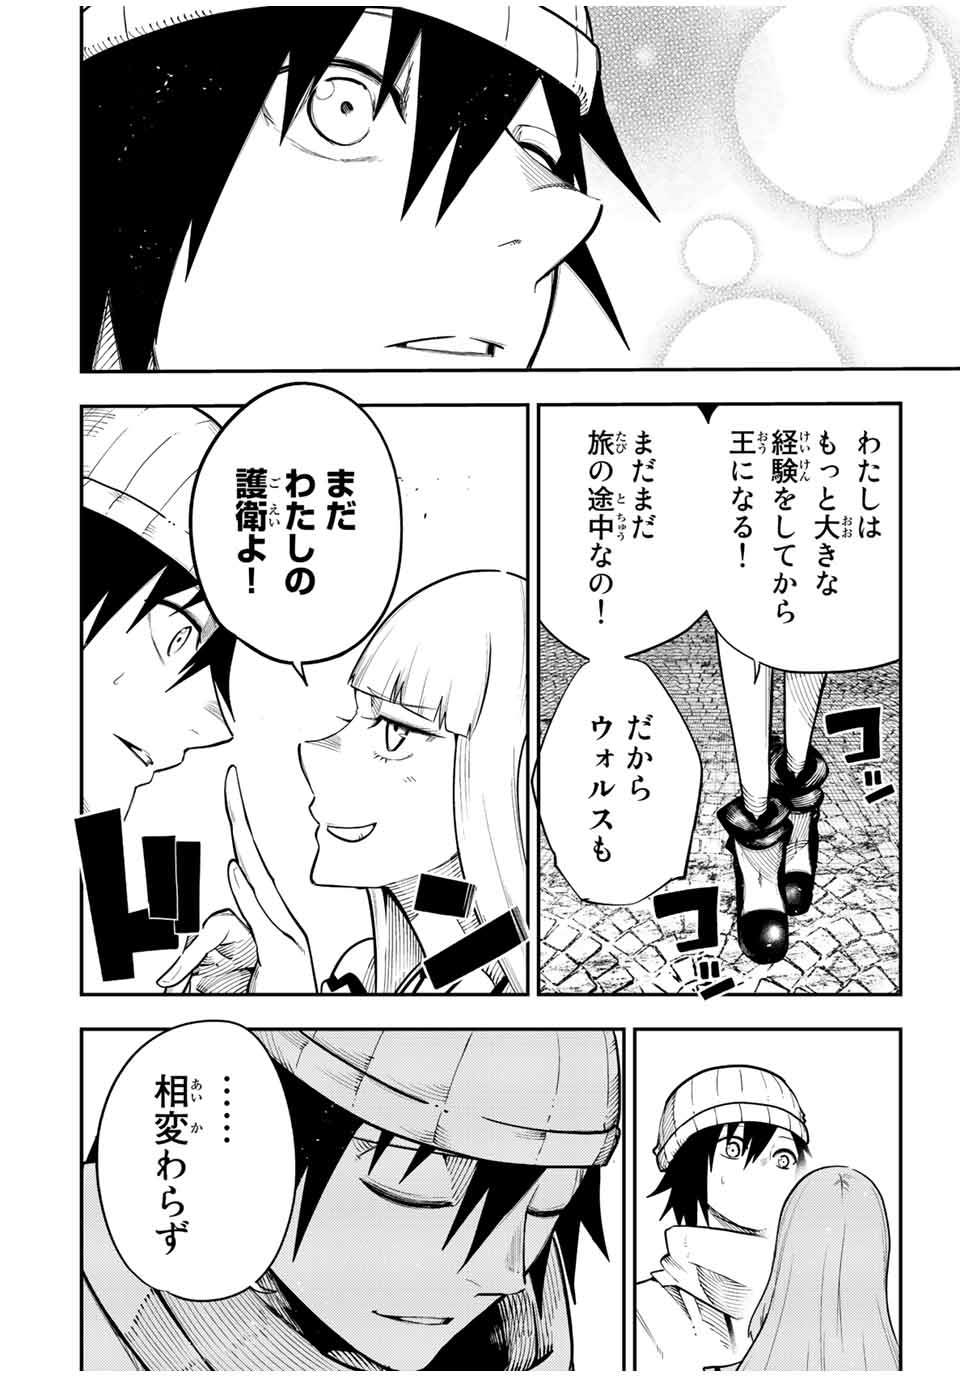 the strongest former prince-; 奴隷転生 ～その奴隷、最強の元王子につき～ 第116話 - Page 22